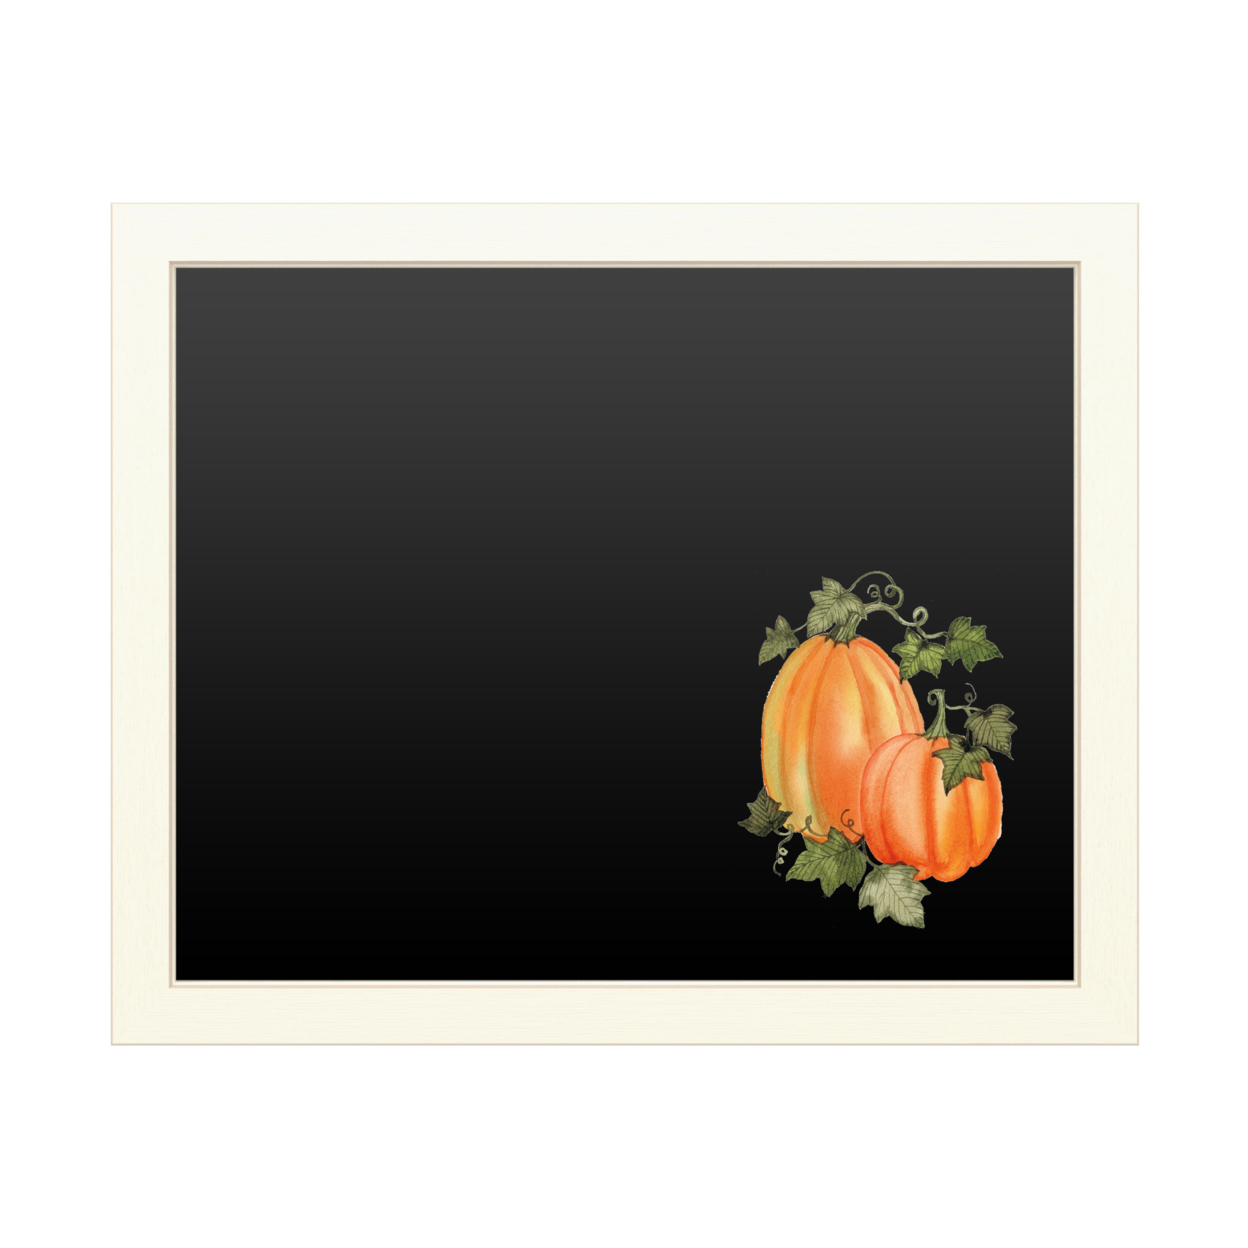 16 X 20 Chalk Board With Printed Artwork - Kathleen Parr Mckenna Pumpkin And Vines I White Board - Ready To Hang Chalkboard